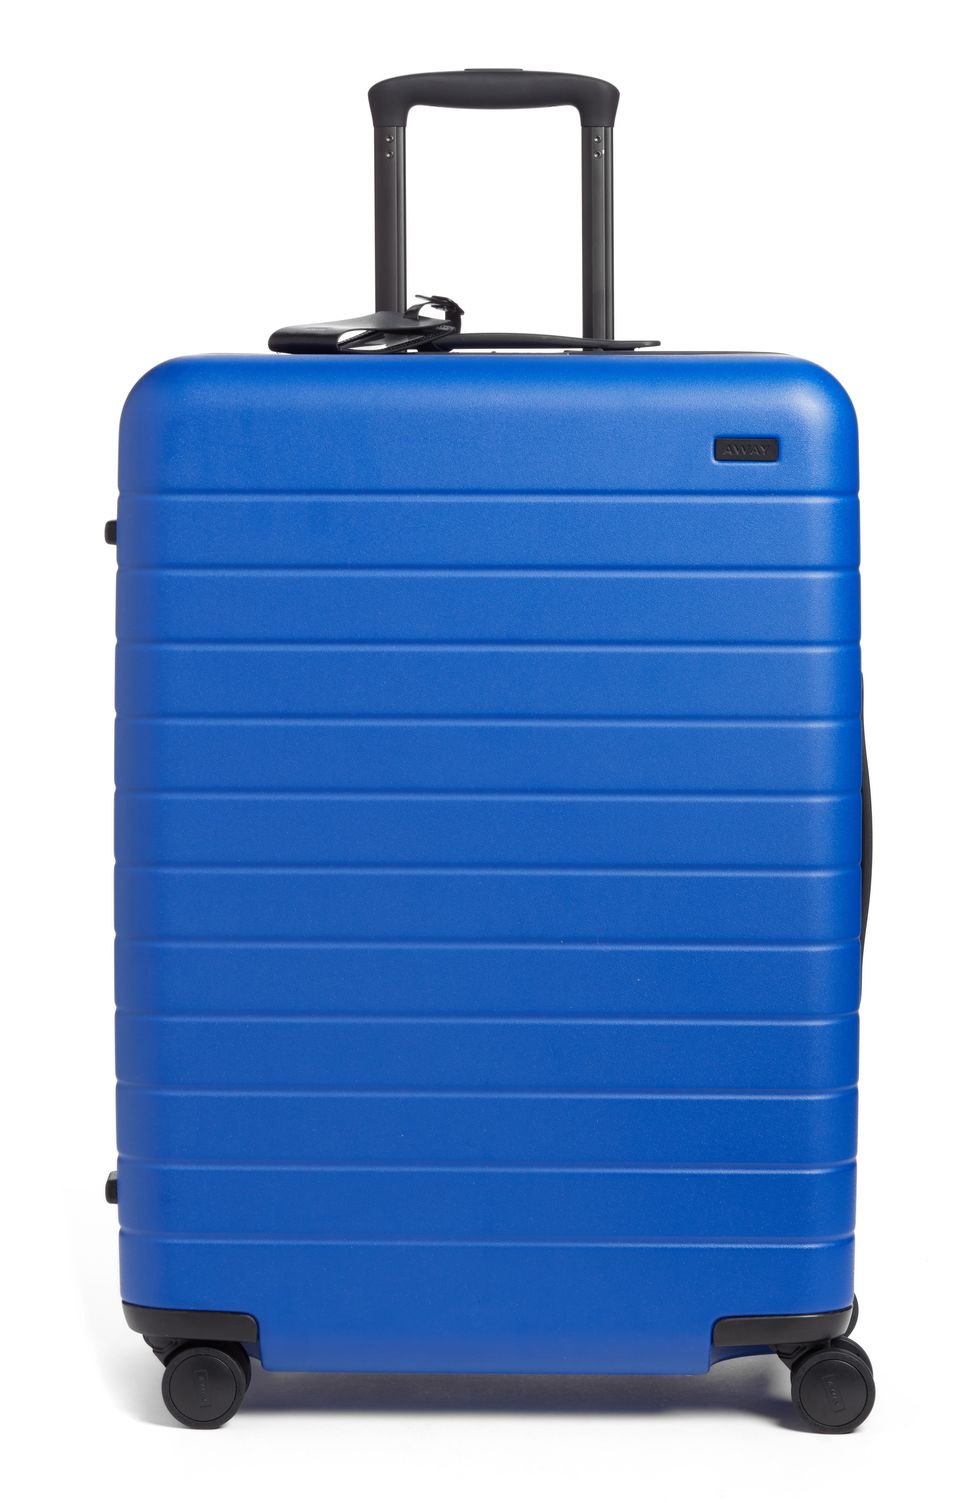 The Medium Hard Shell Suitcase in Blue